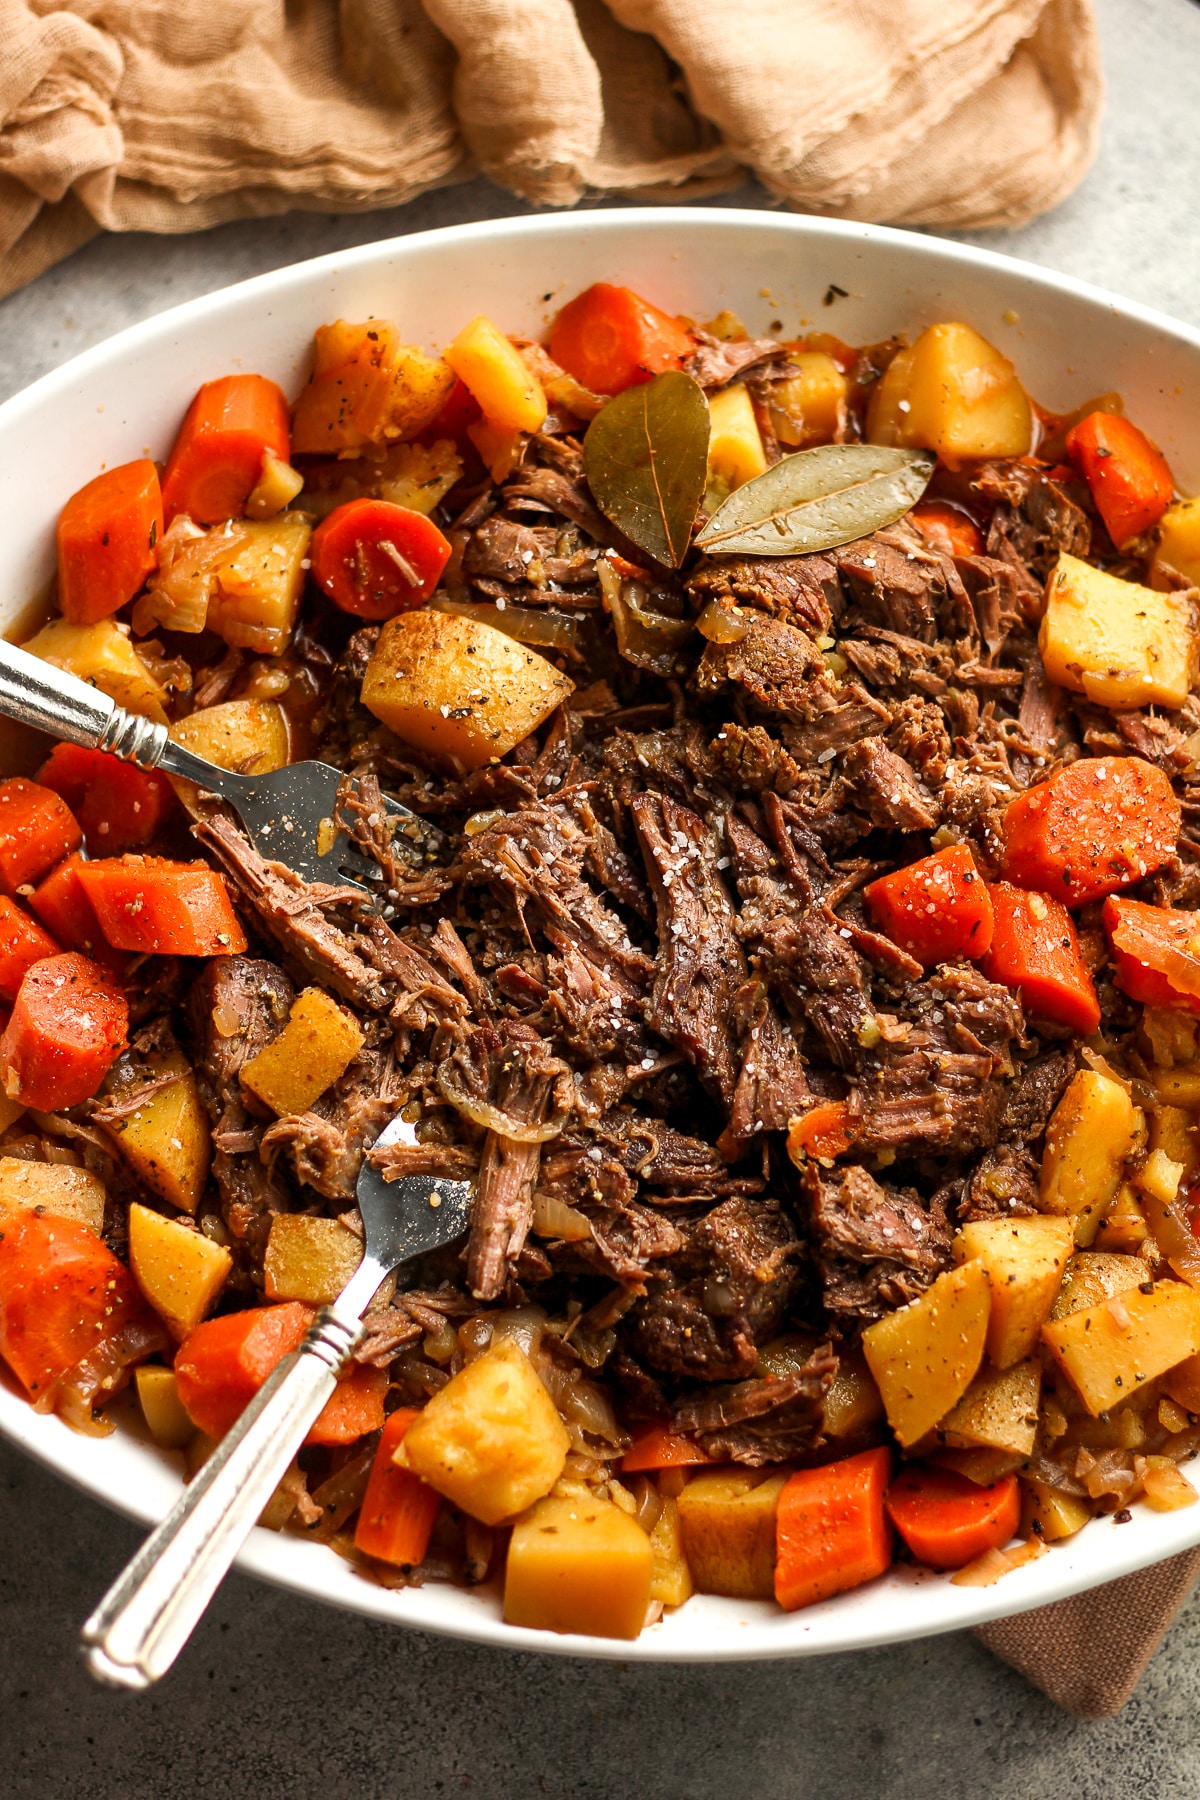 A serving platter of the shredded roast with veggies.